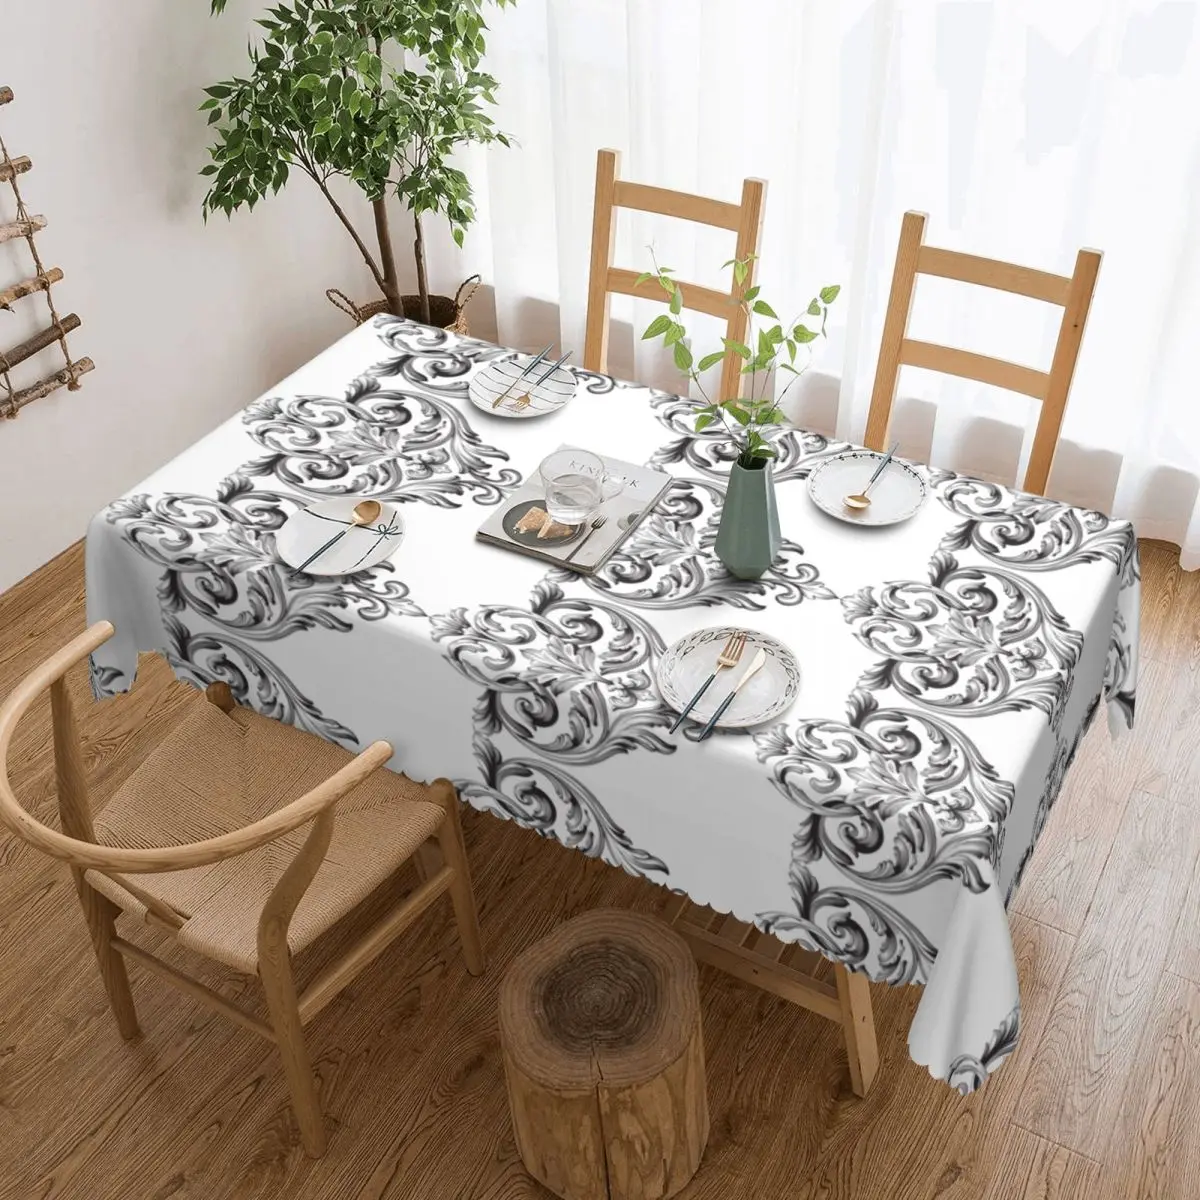 

Rectangular Waterproof Oil-Proof Luxury European Floral Tablecloth Table Cover 40"-44" Fit Baroque Victorian Art Table Cloth